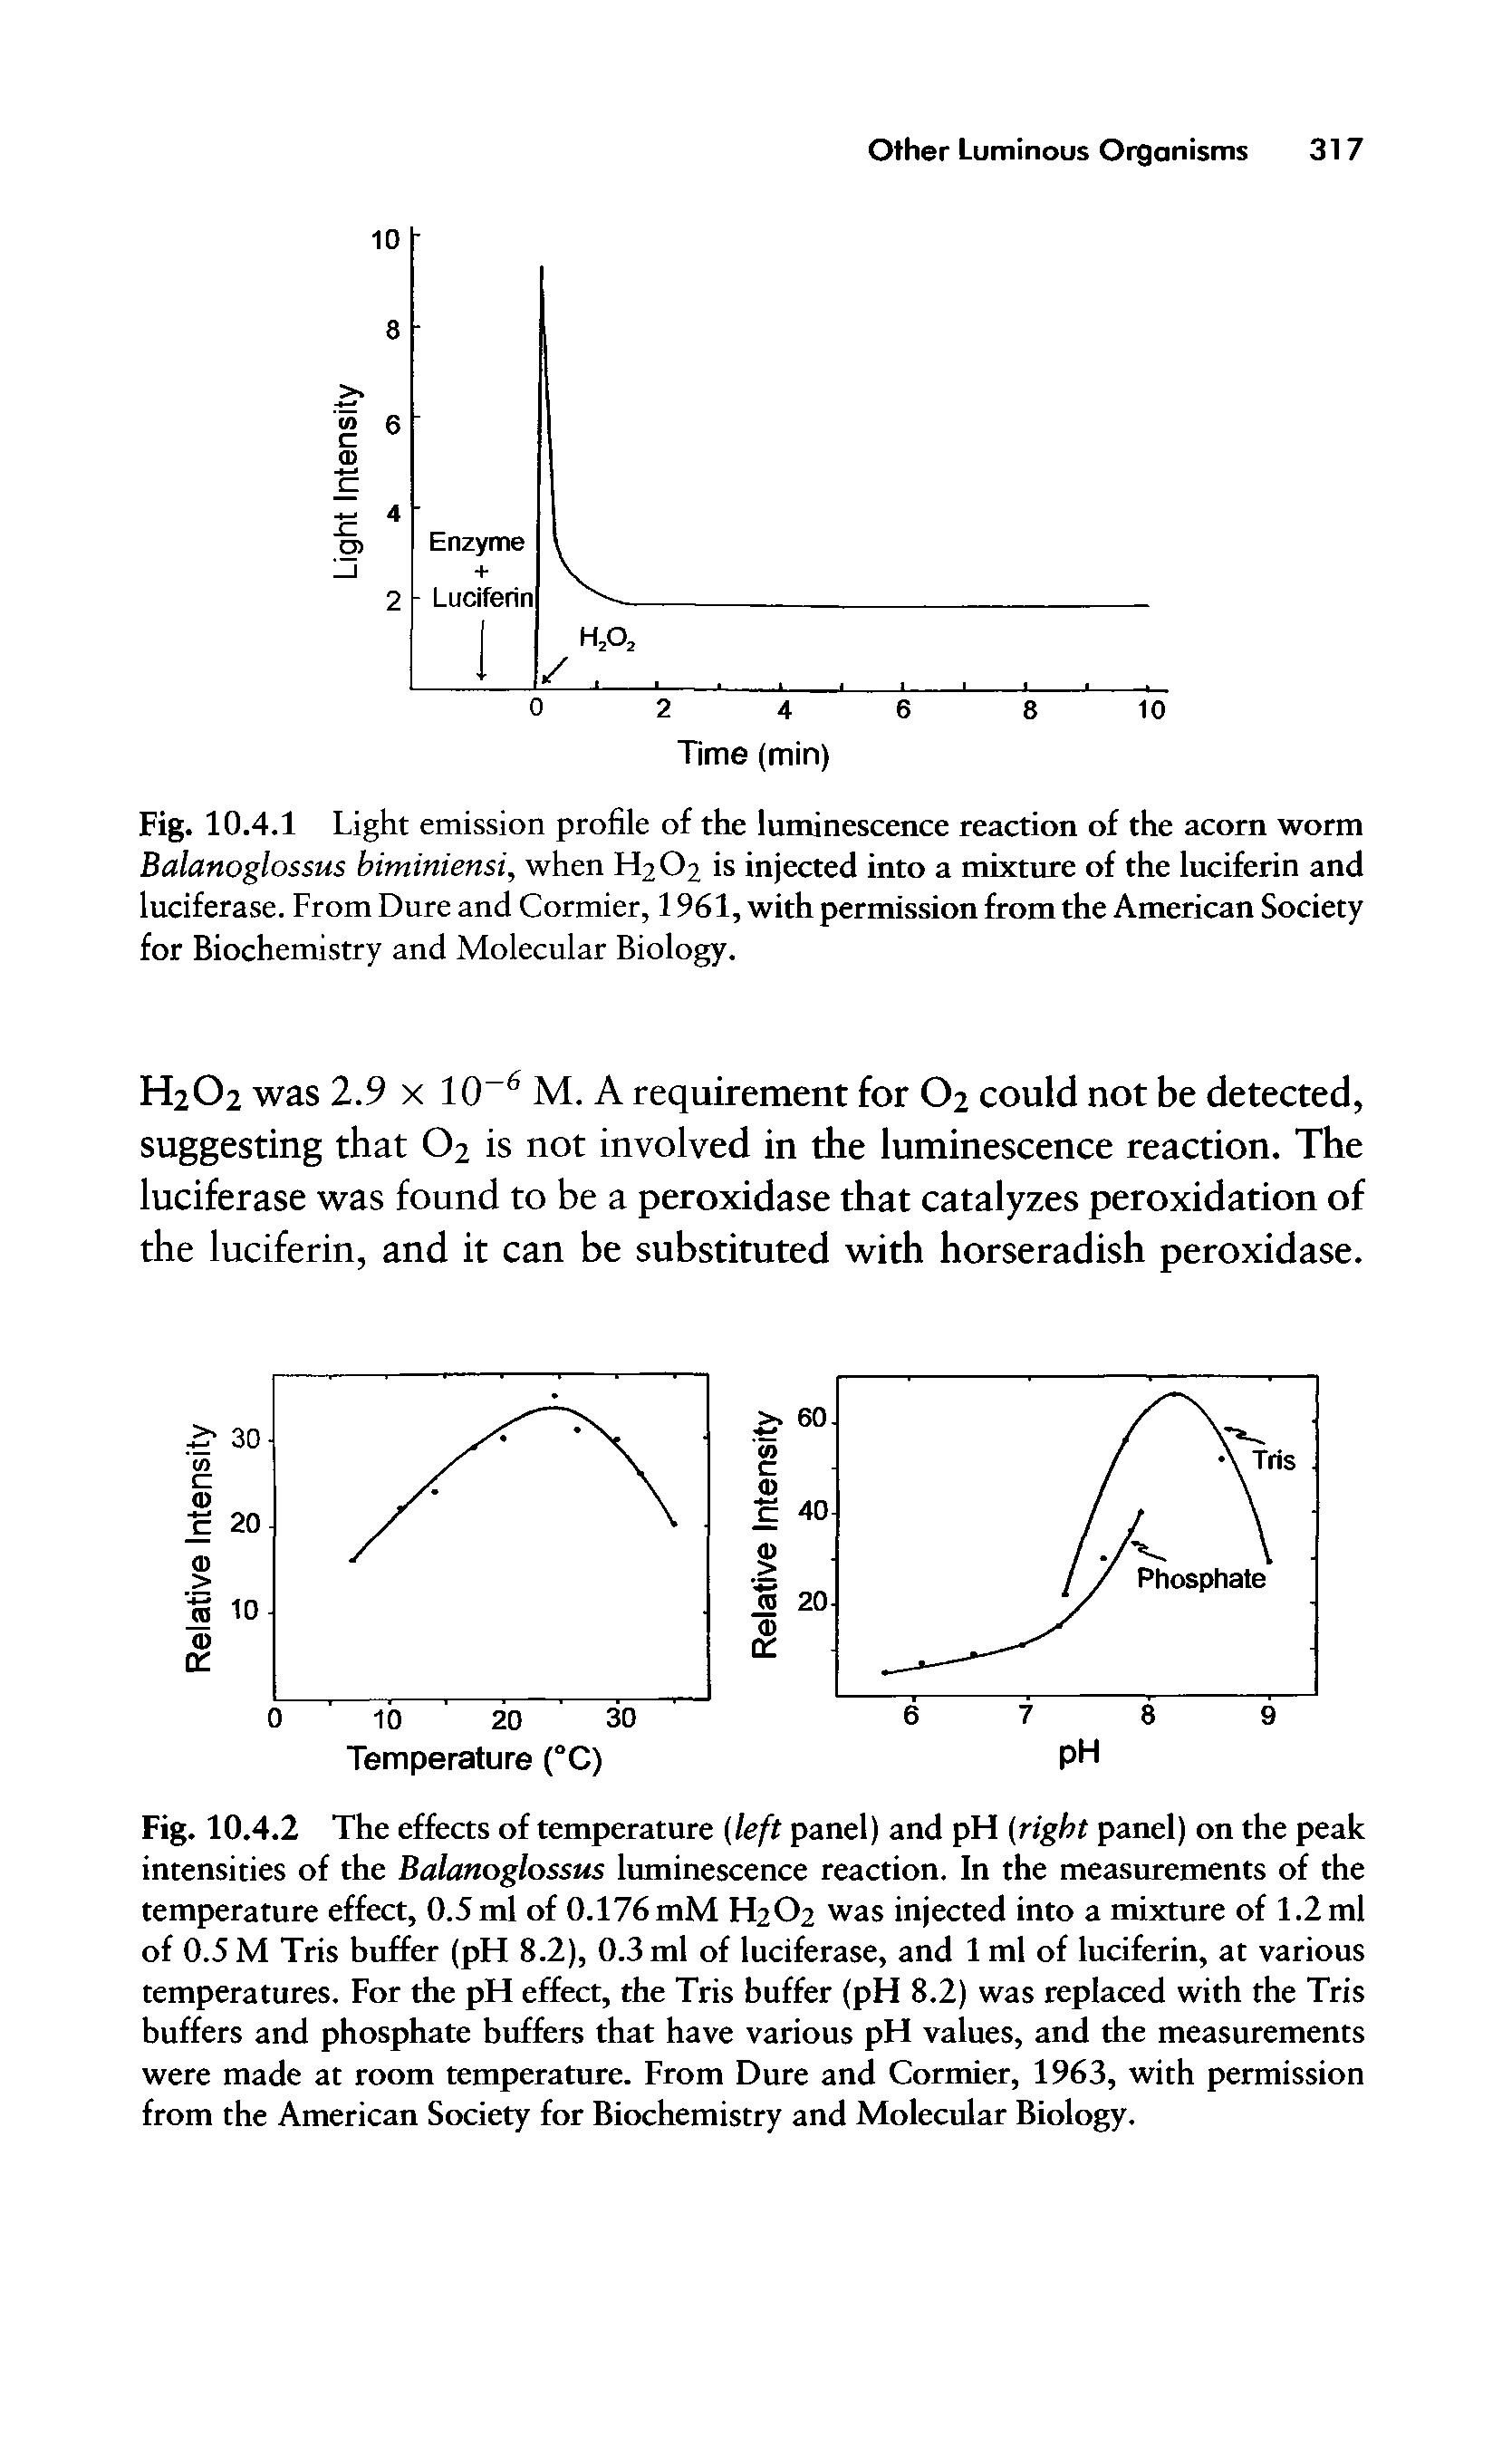 Fig. 10.4.1 Light emission profile of the luminescence reaction of the acorn worm Balanoglossus biminiensi, when H2O2 is injected into a mixture of the luciferin and luciferase. From Dure and Cormier, 1961, with permission from the American Society for Biochemistry and Molecular Biology.